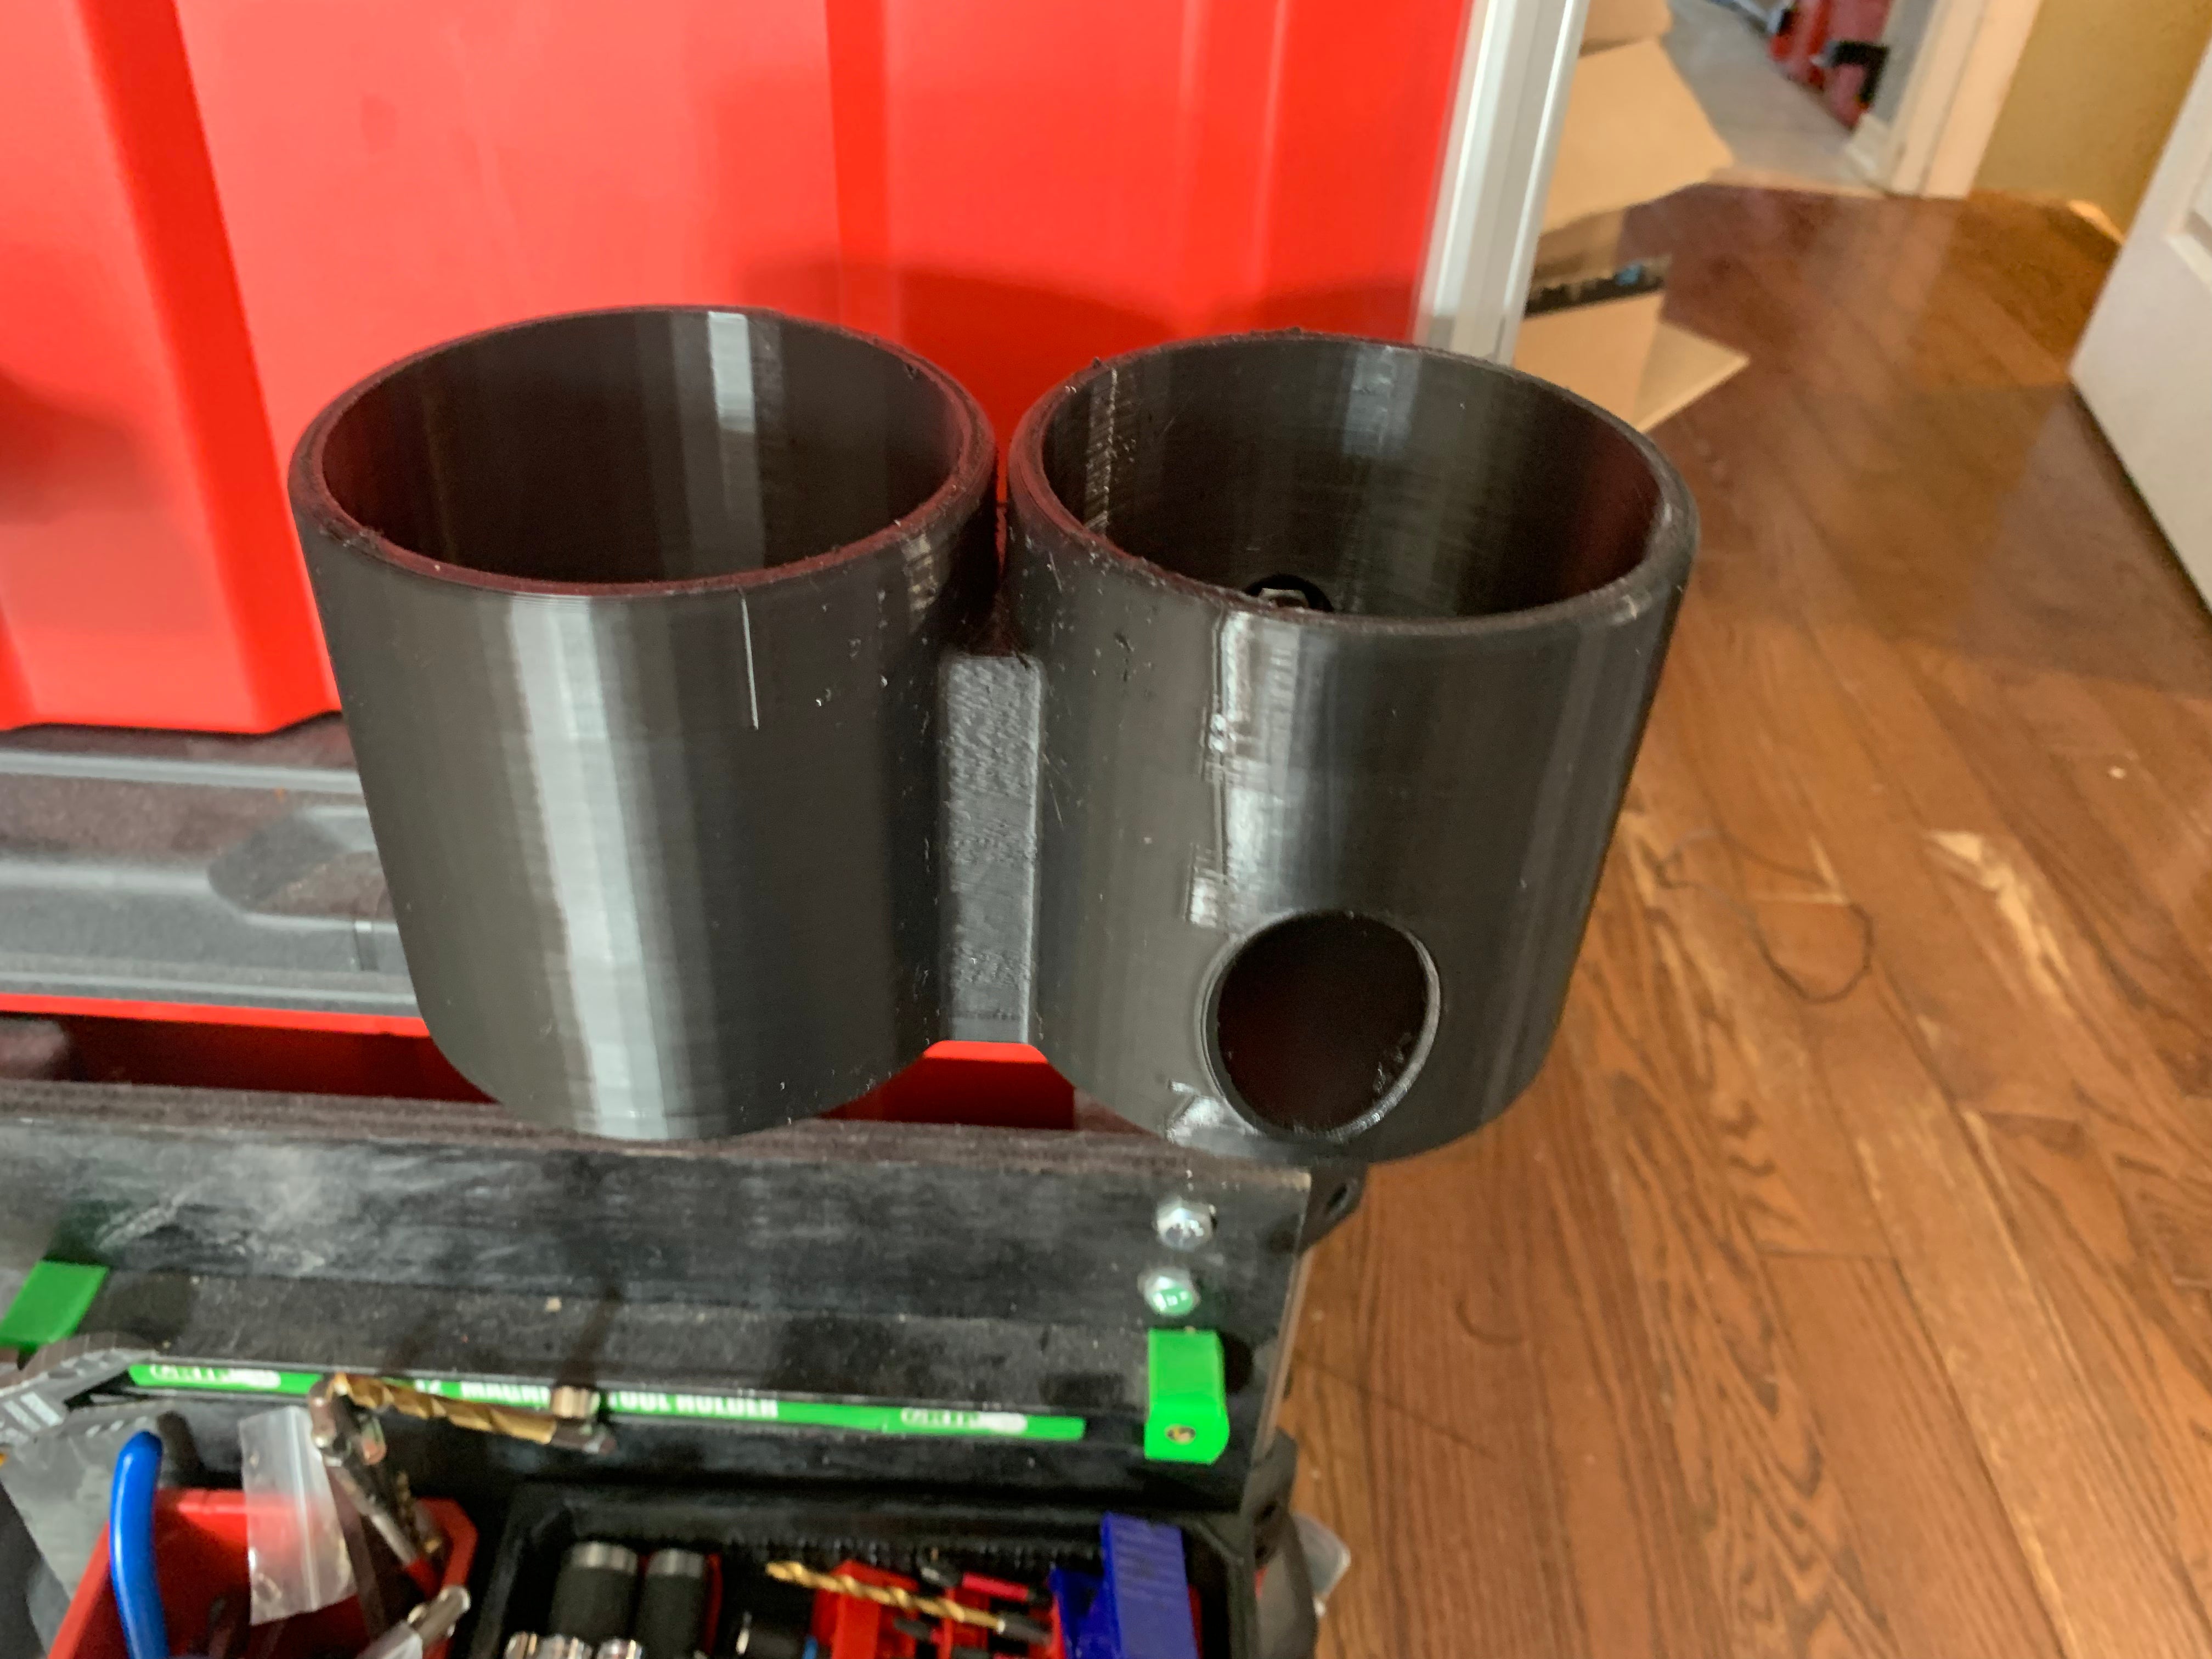 Packout Cup Holders 2.0 